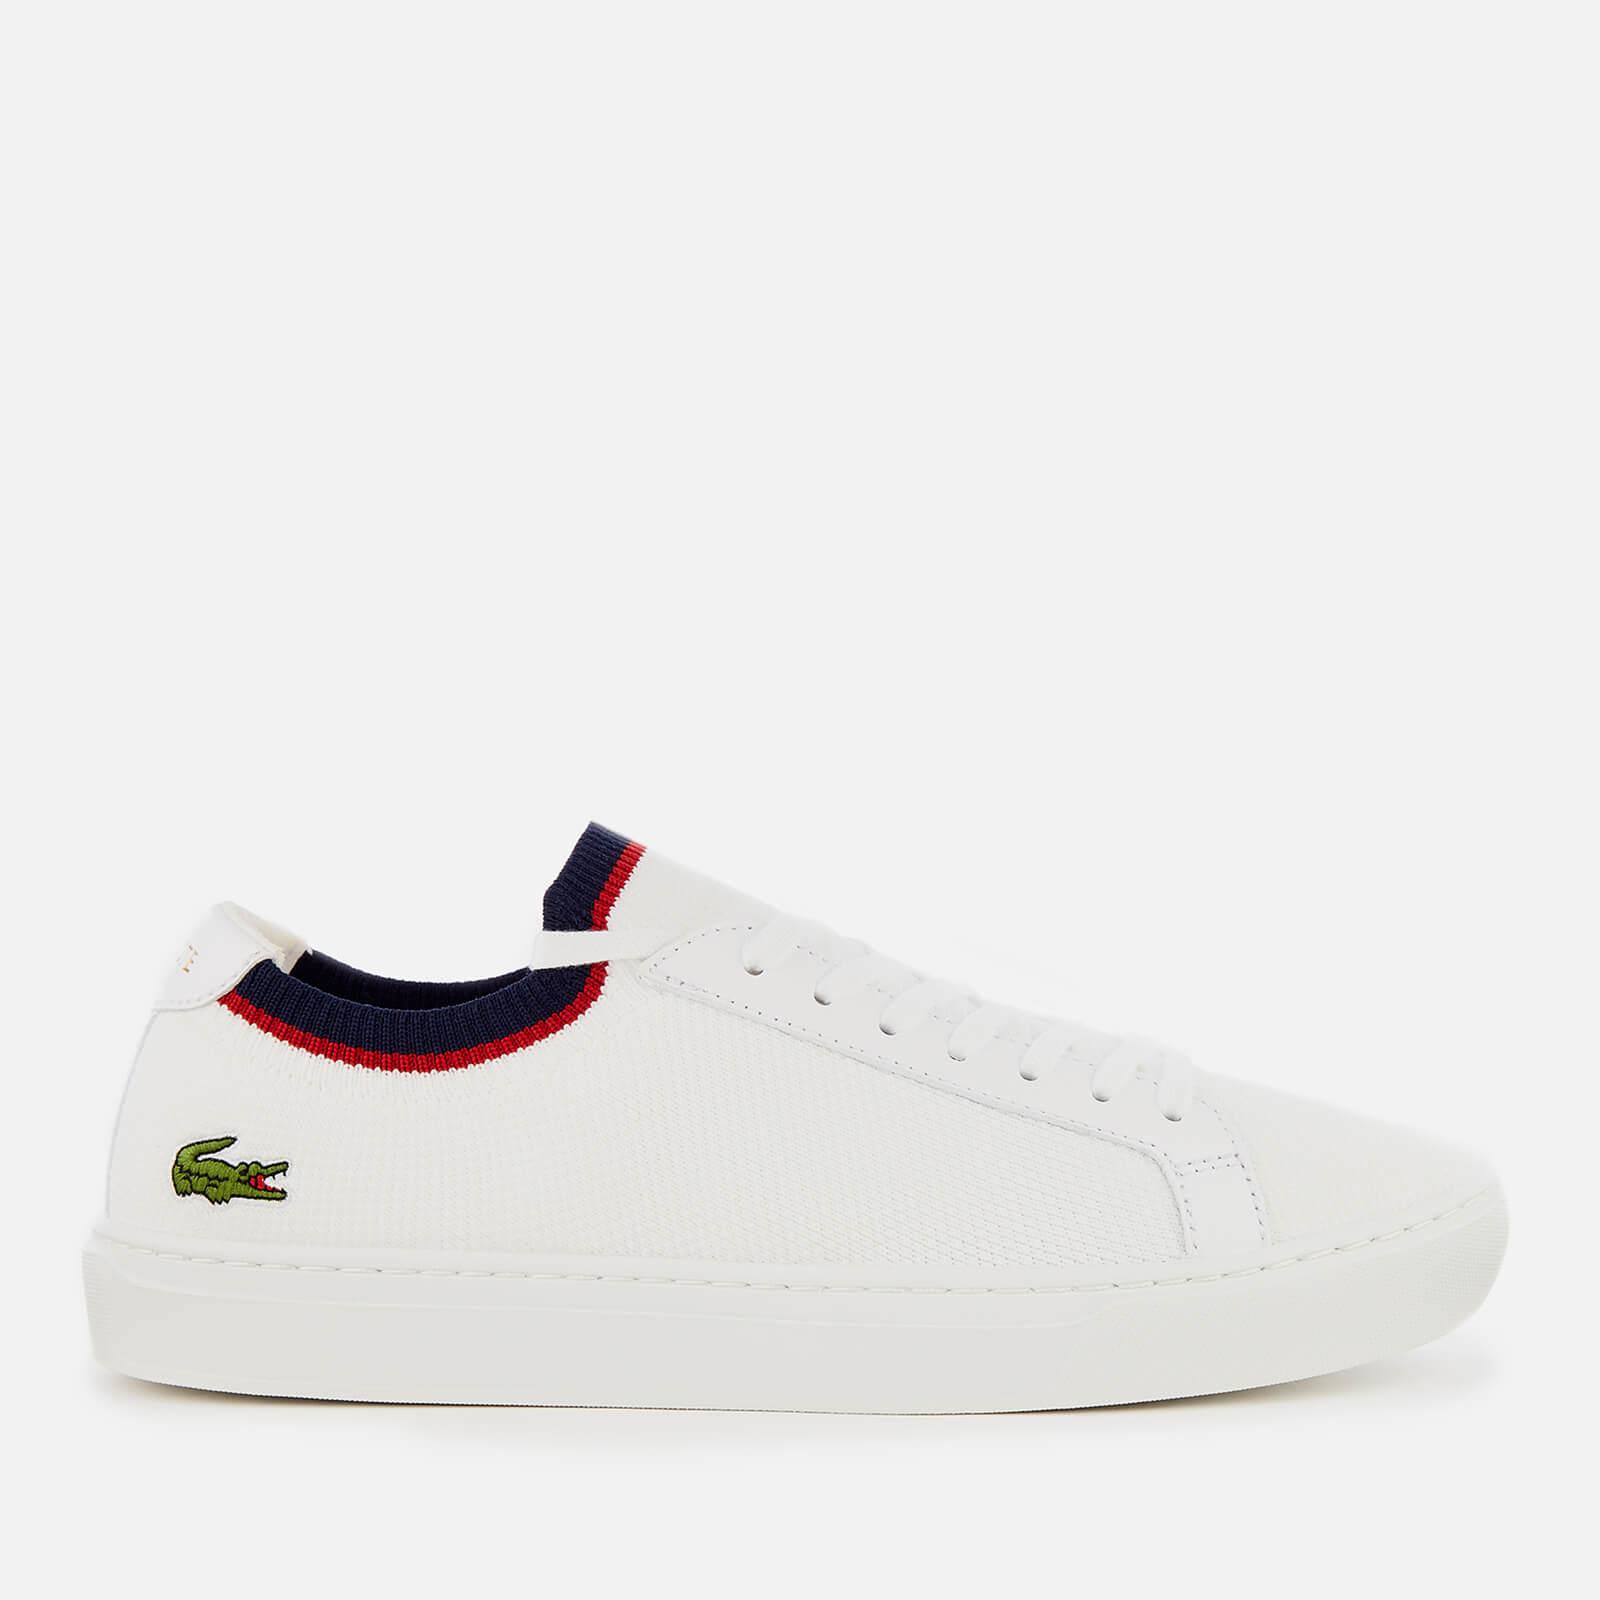 Lacoste Men's La-Piquee-119 White/Navy/Red Sneakers Shoes 